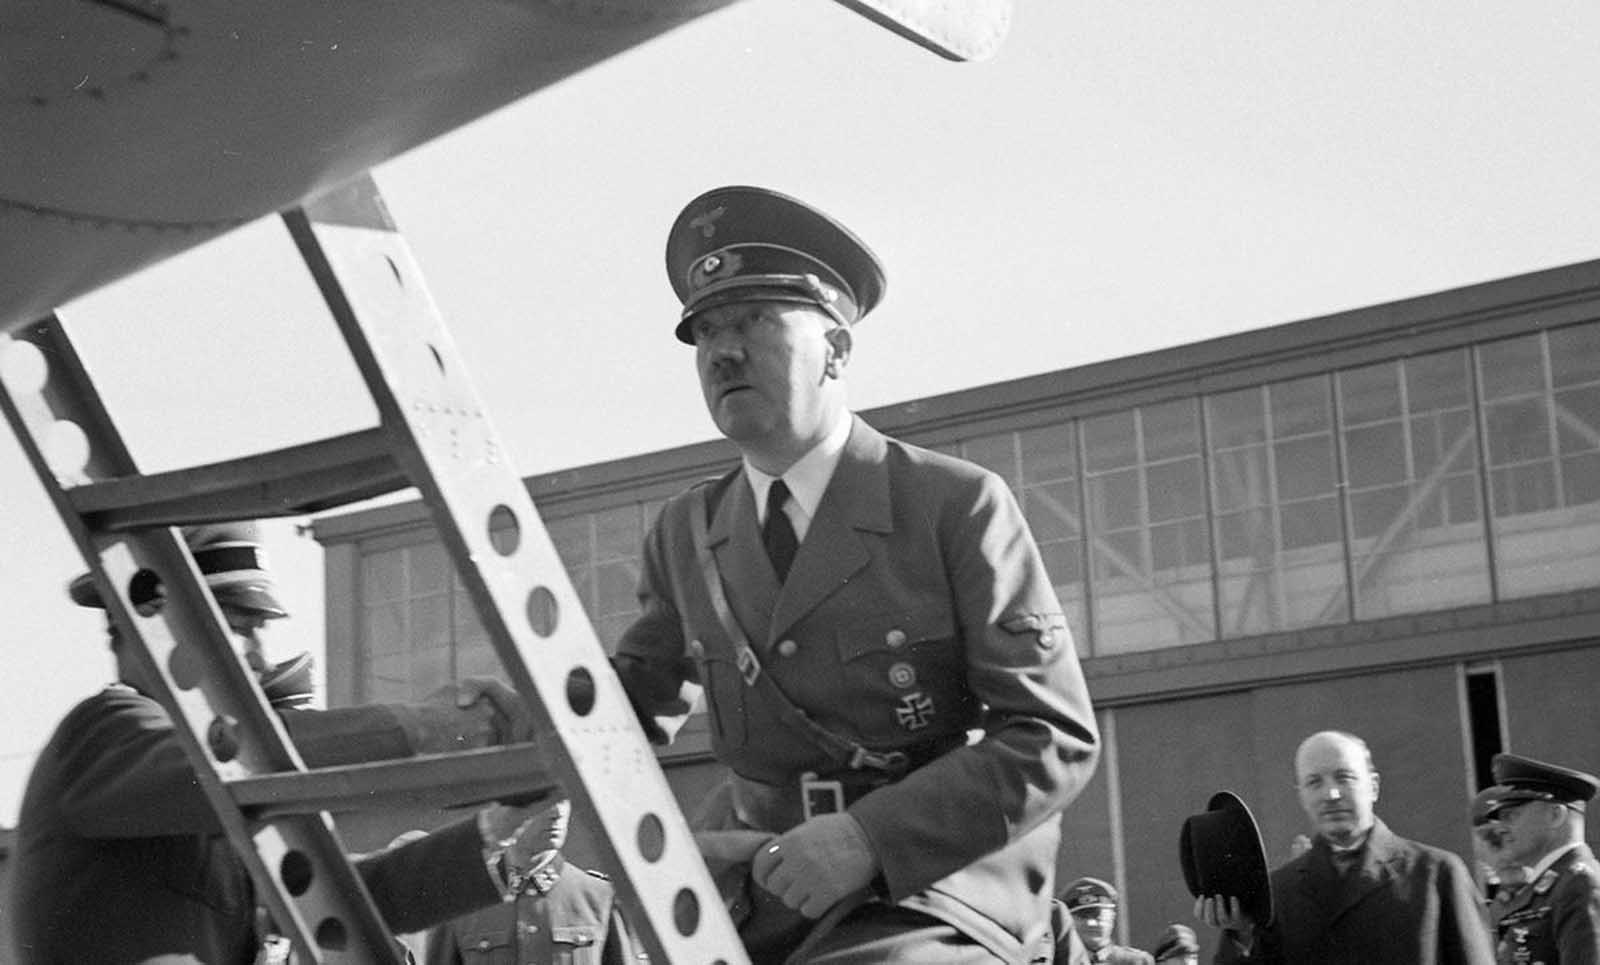 Hitler's visit to Finland. Adolf Hitler, leader of Nazi Germany, made a brief visit to Finland in June of 1942. 